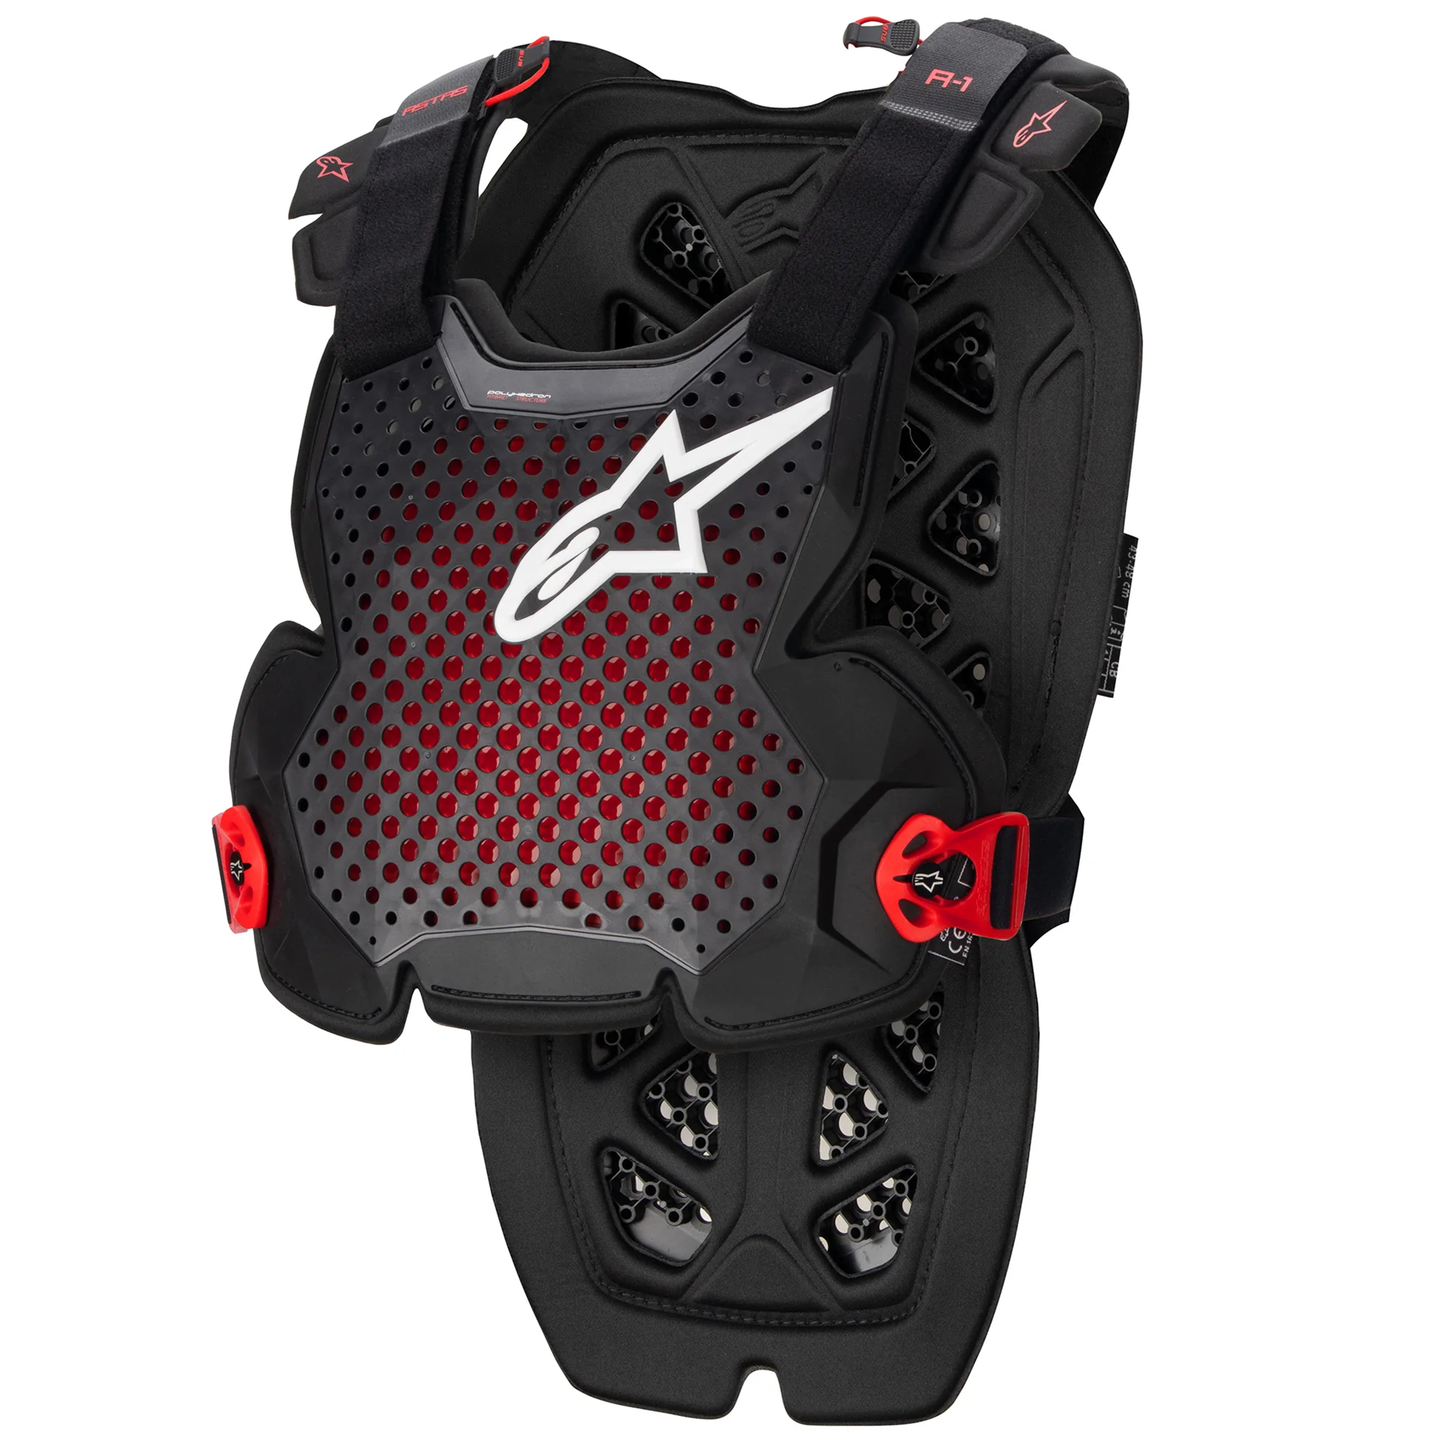 Alpinestars A-1 Pro Chest Protector - Anthracite/Black/Red